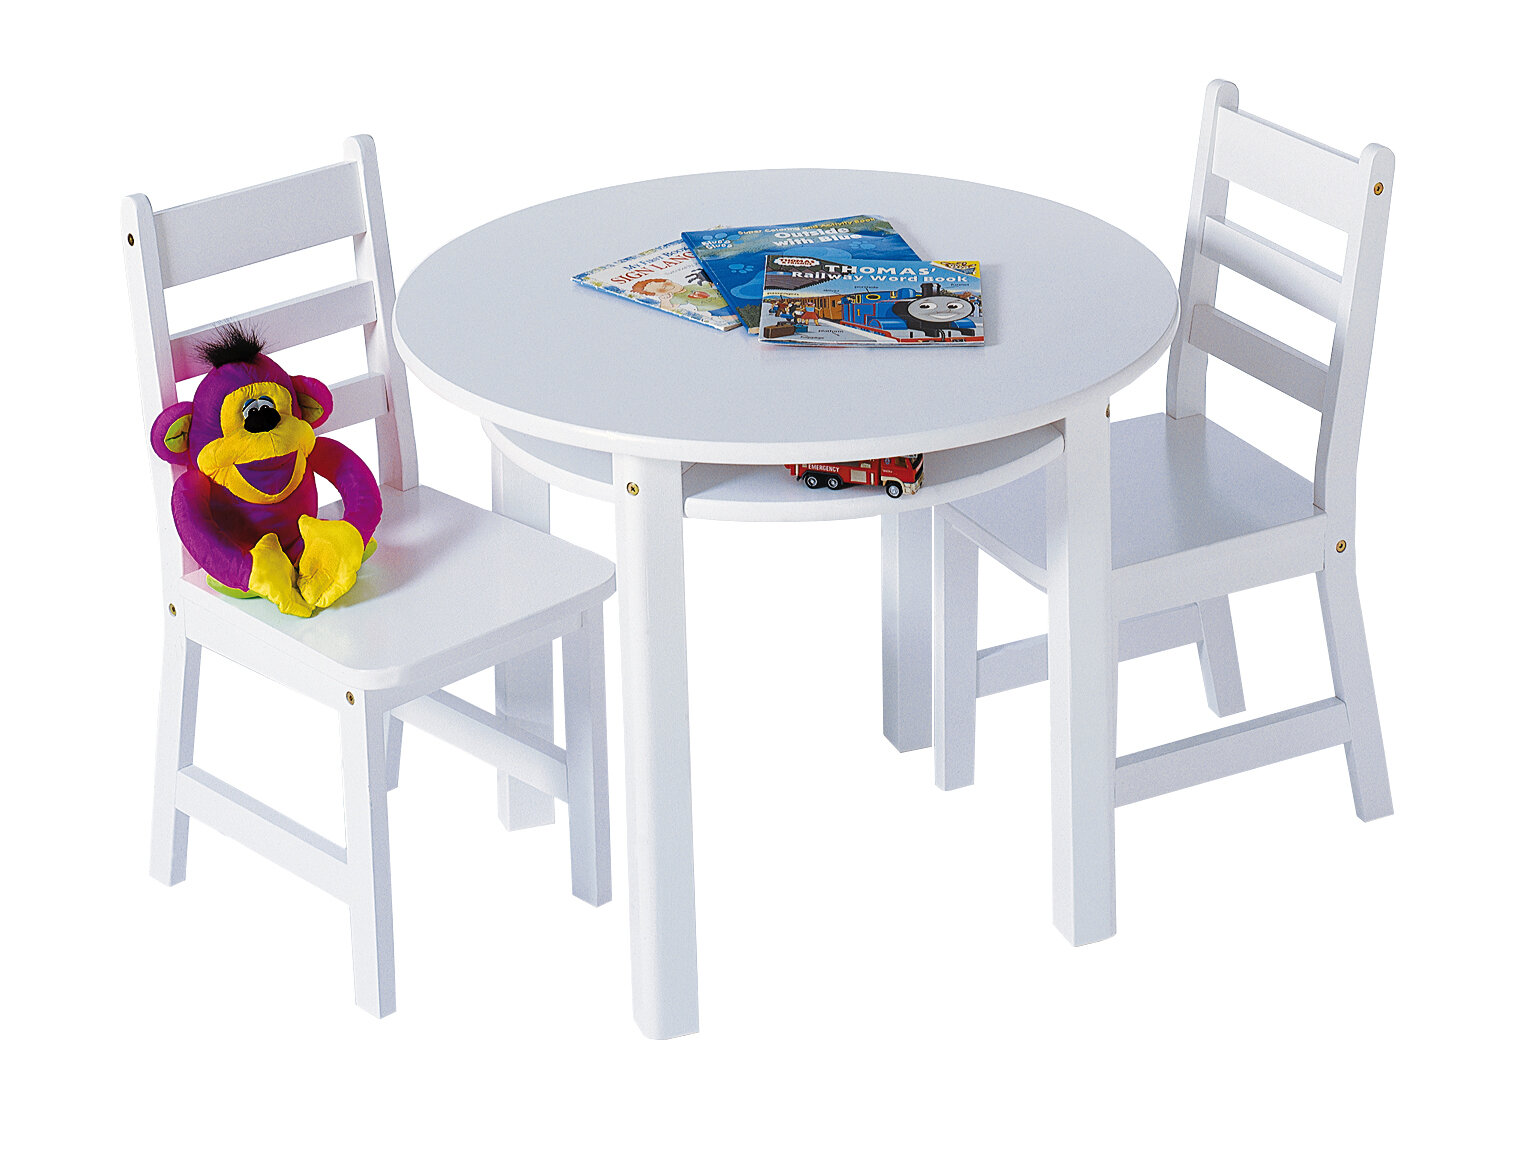 Harriet Bee Beaconsdale Kids Round Play Activity Table And Chair Set Reviews Wayfair